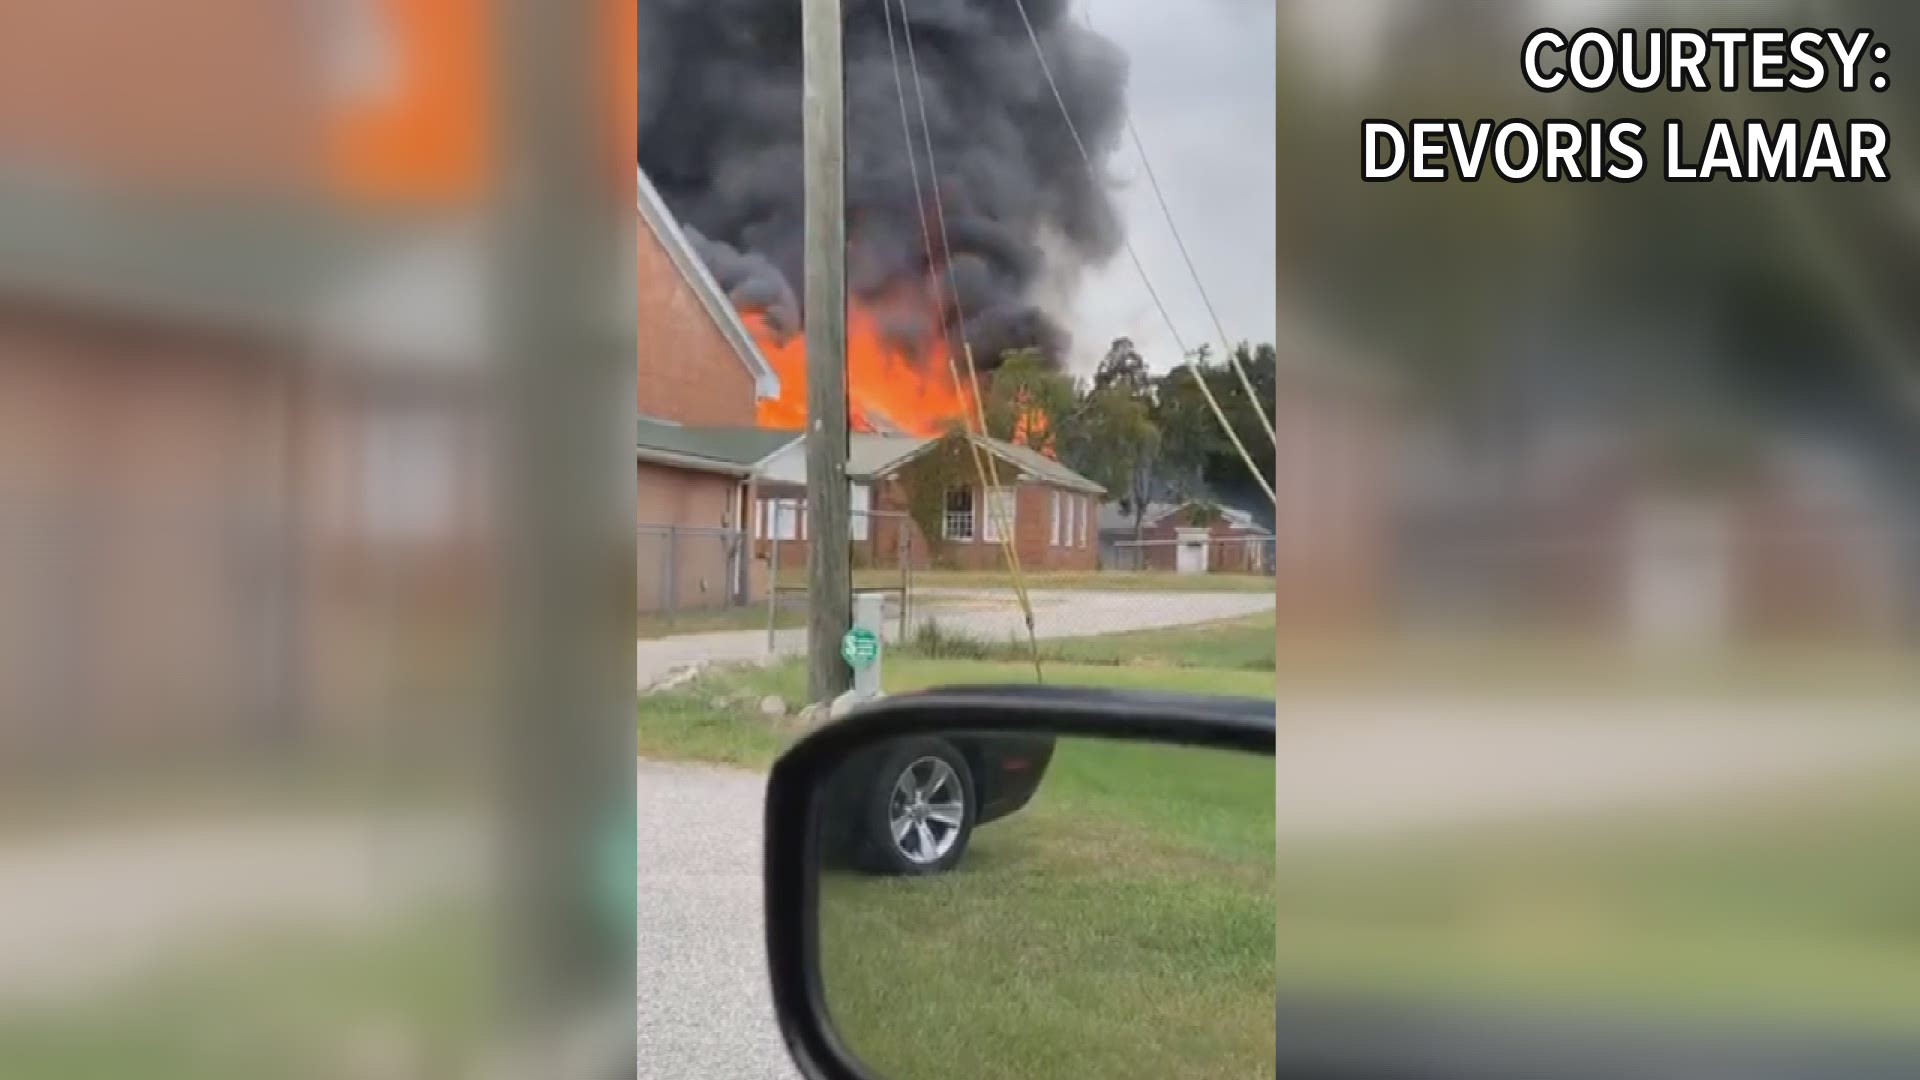 The old Hancock County Board of Education building on Augusta Highway caught fire Sunday afternoon.